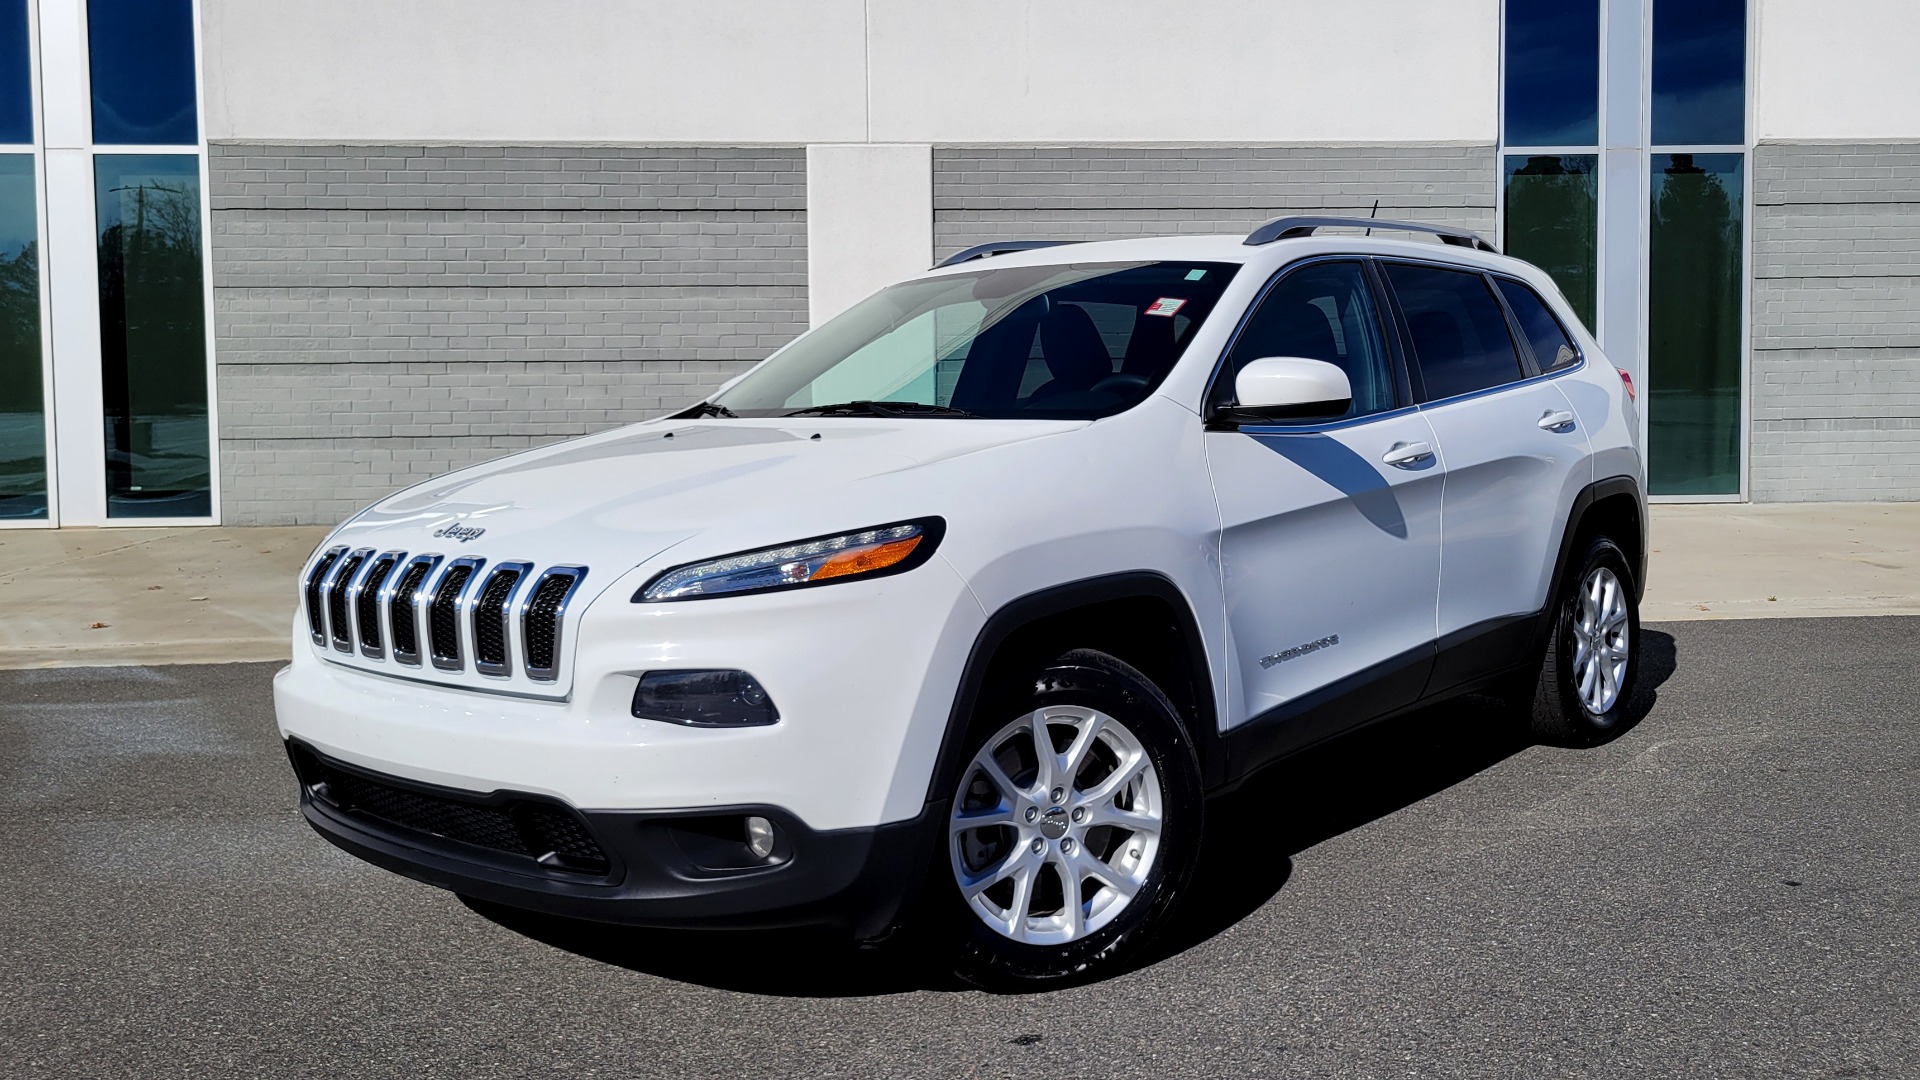 Used 2016 Jeep CHEROKEE LATITUDE FWD / 2.4L I4 / 9-SPD AUTO / 5IN TOUCHSCREEN / REARVIEW for sale $15,495 at Formula Imports in Charlotte NC 28227 1